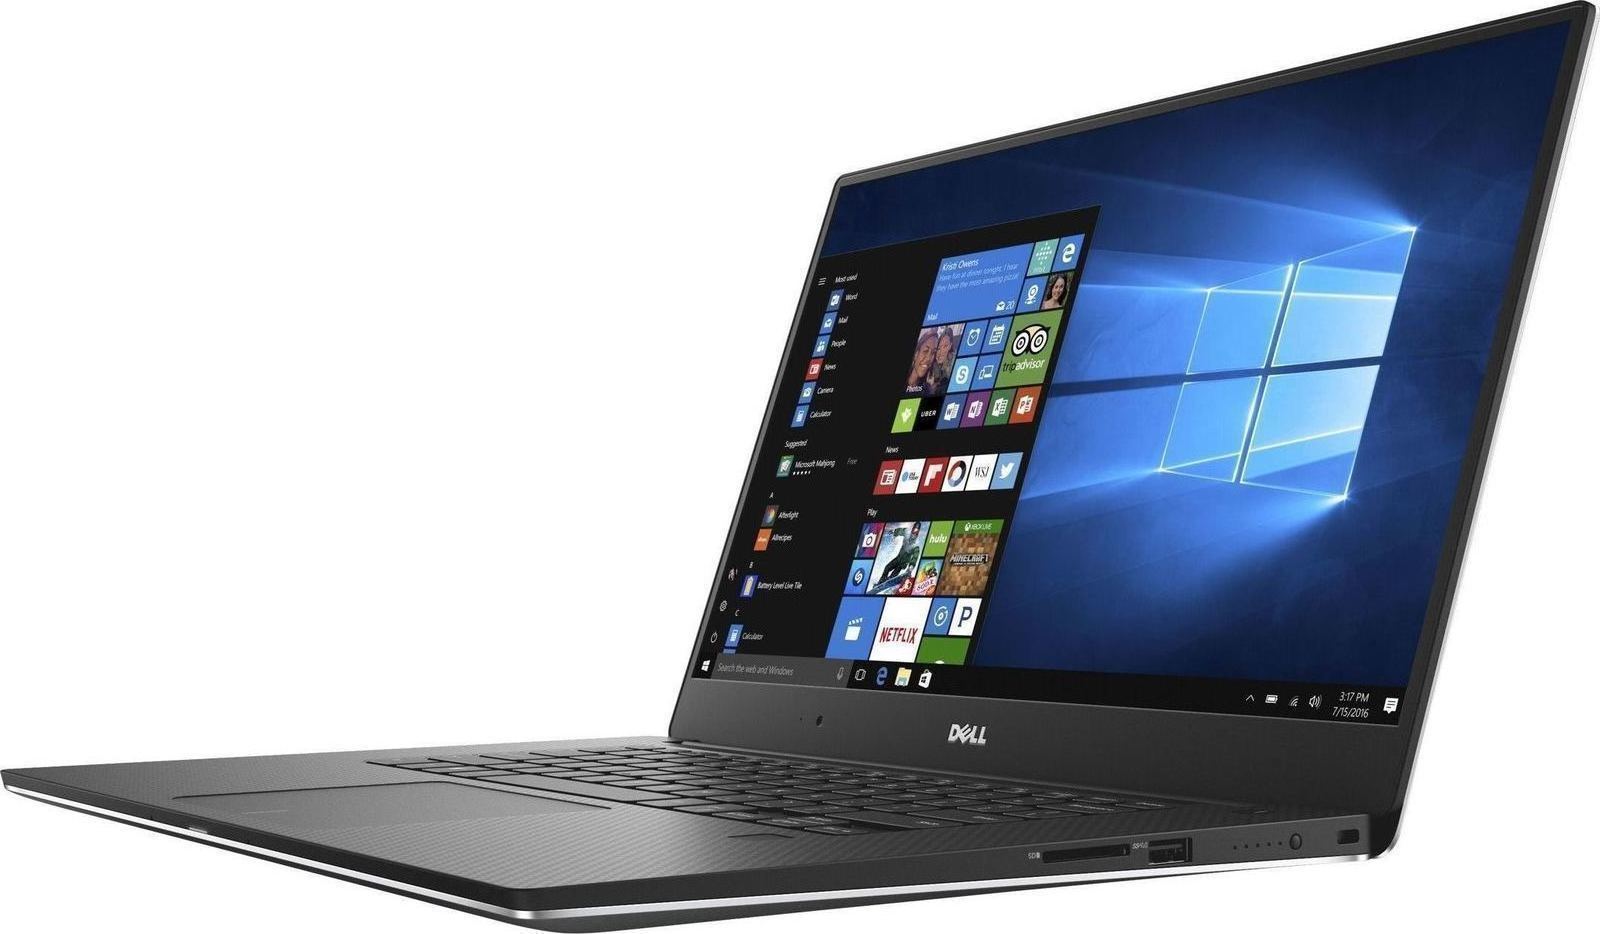 Dell Xps 15 9560 Touch I7 7700hq16gb512gbgeforce Gtx 1050uhdw10